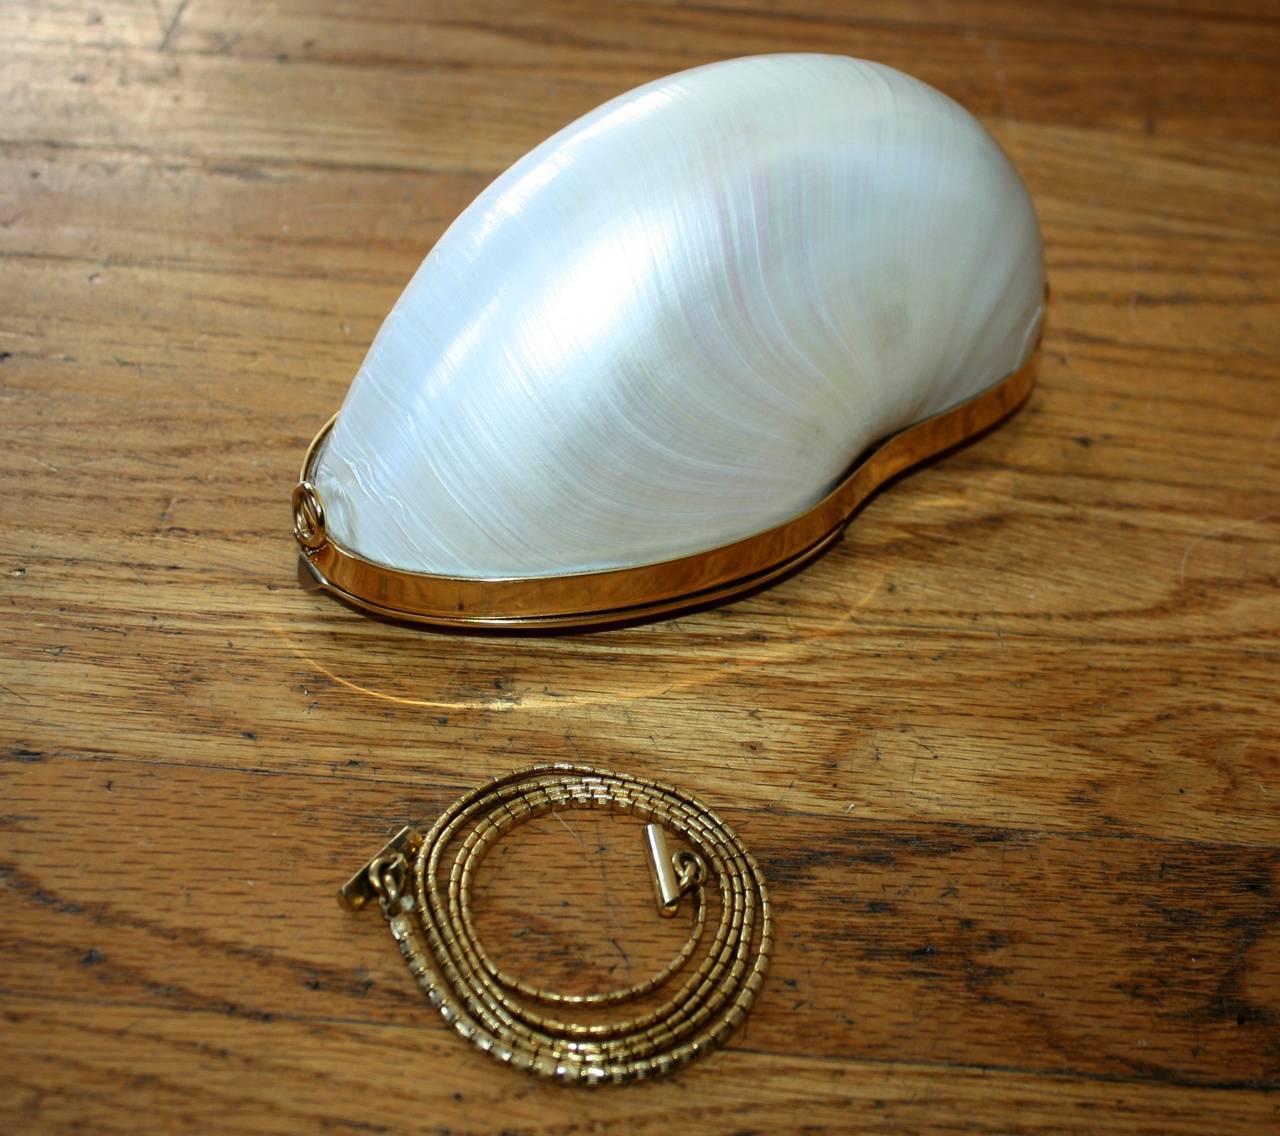 Extremely rare vintage Judith Leiber seashell minaudière, with detachable gold chain! This unique treasure originates from an actual seashell, complete with gold leather lining, and original duster. Leiber's seashell collection was only produced for